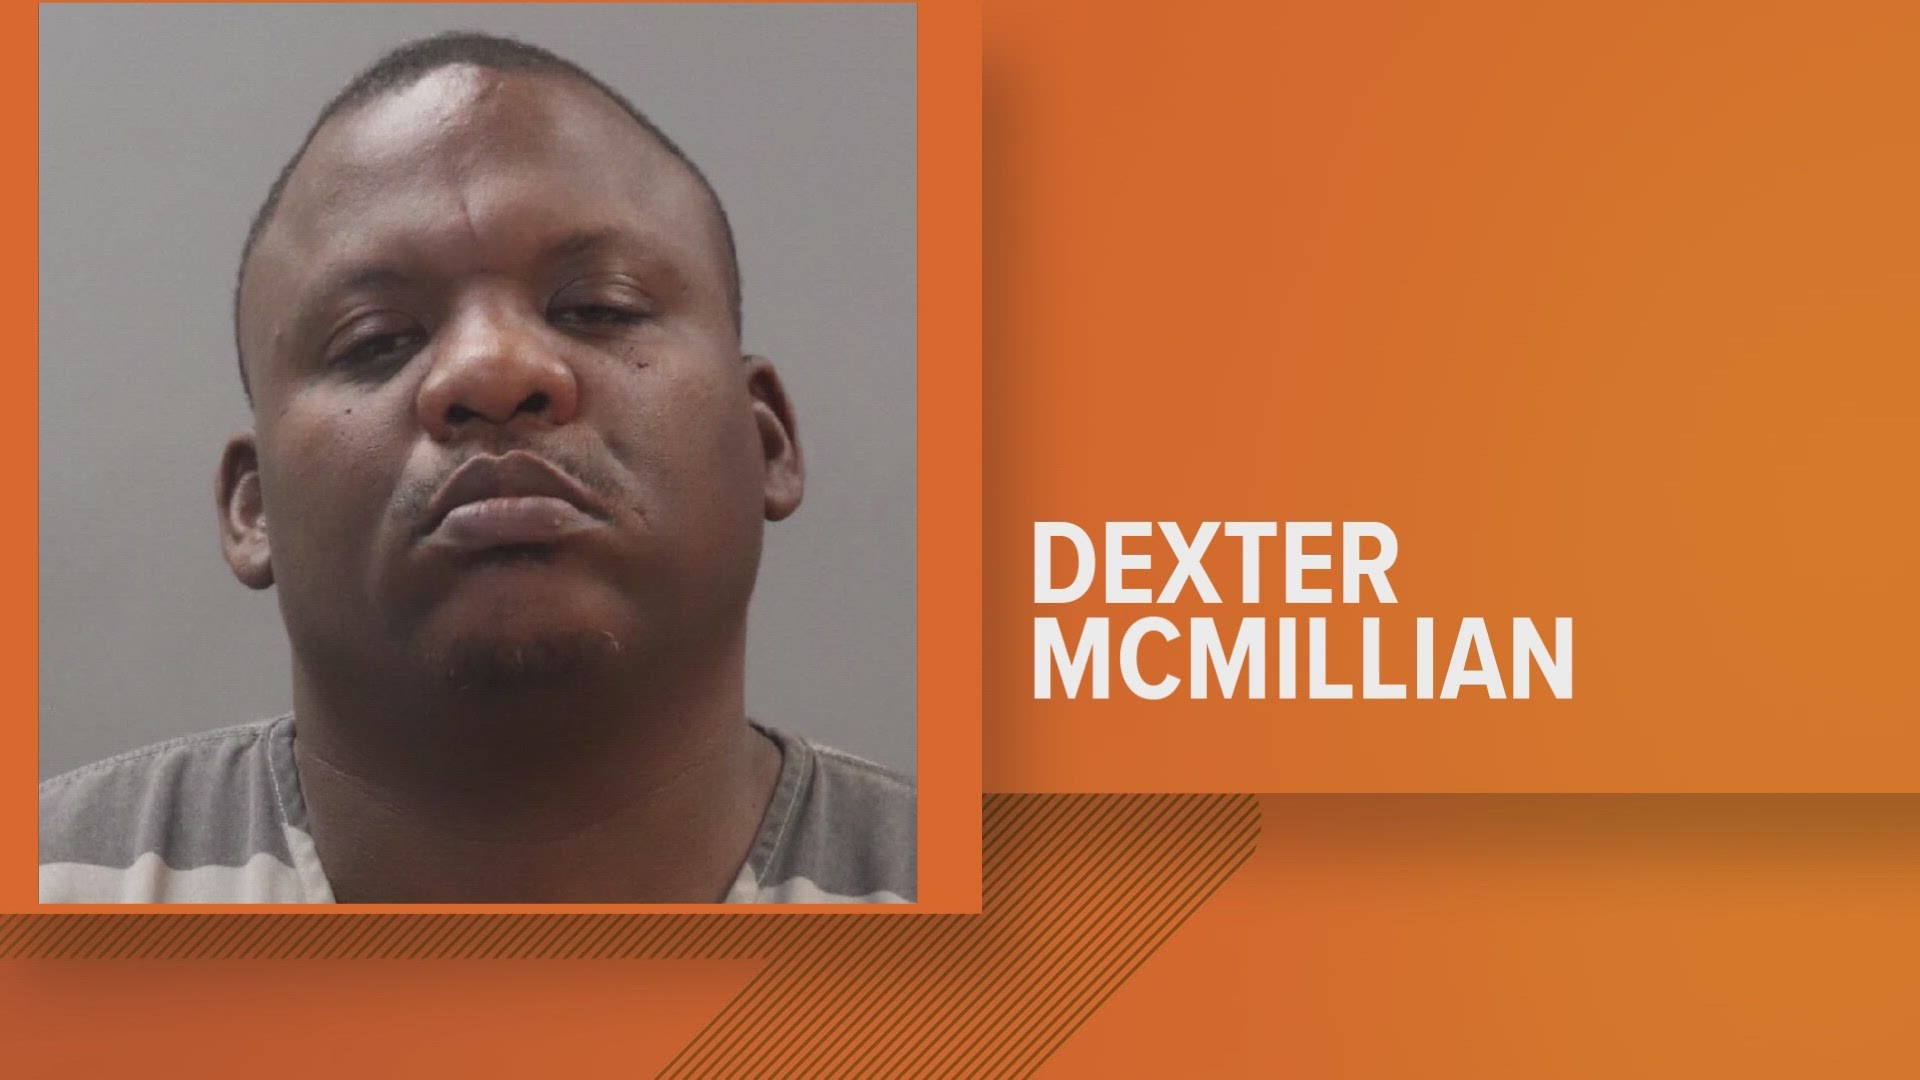 Dexter McMillan was wanted on charges of attempted first-degree murder and employing a firearm with the intent to go armed, officials said.